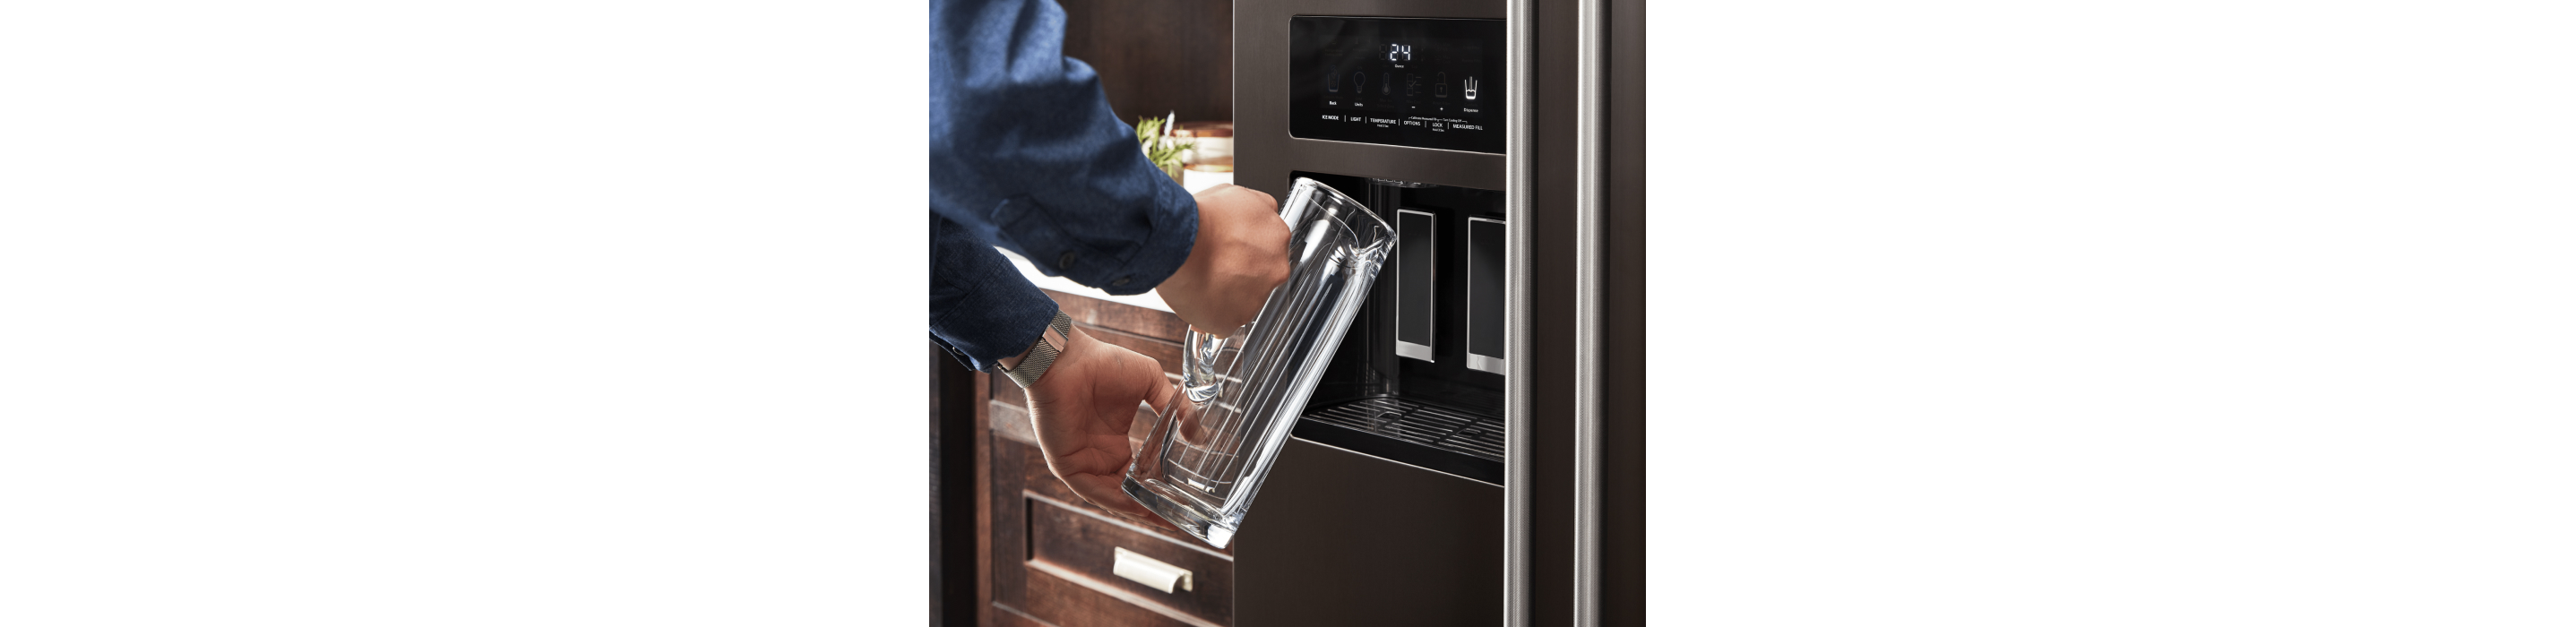 How To Change A Fridge Water Filter In 5 Steps Kitchenaid